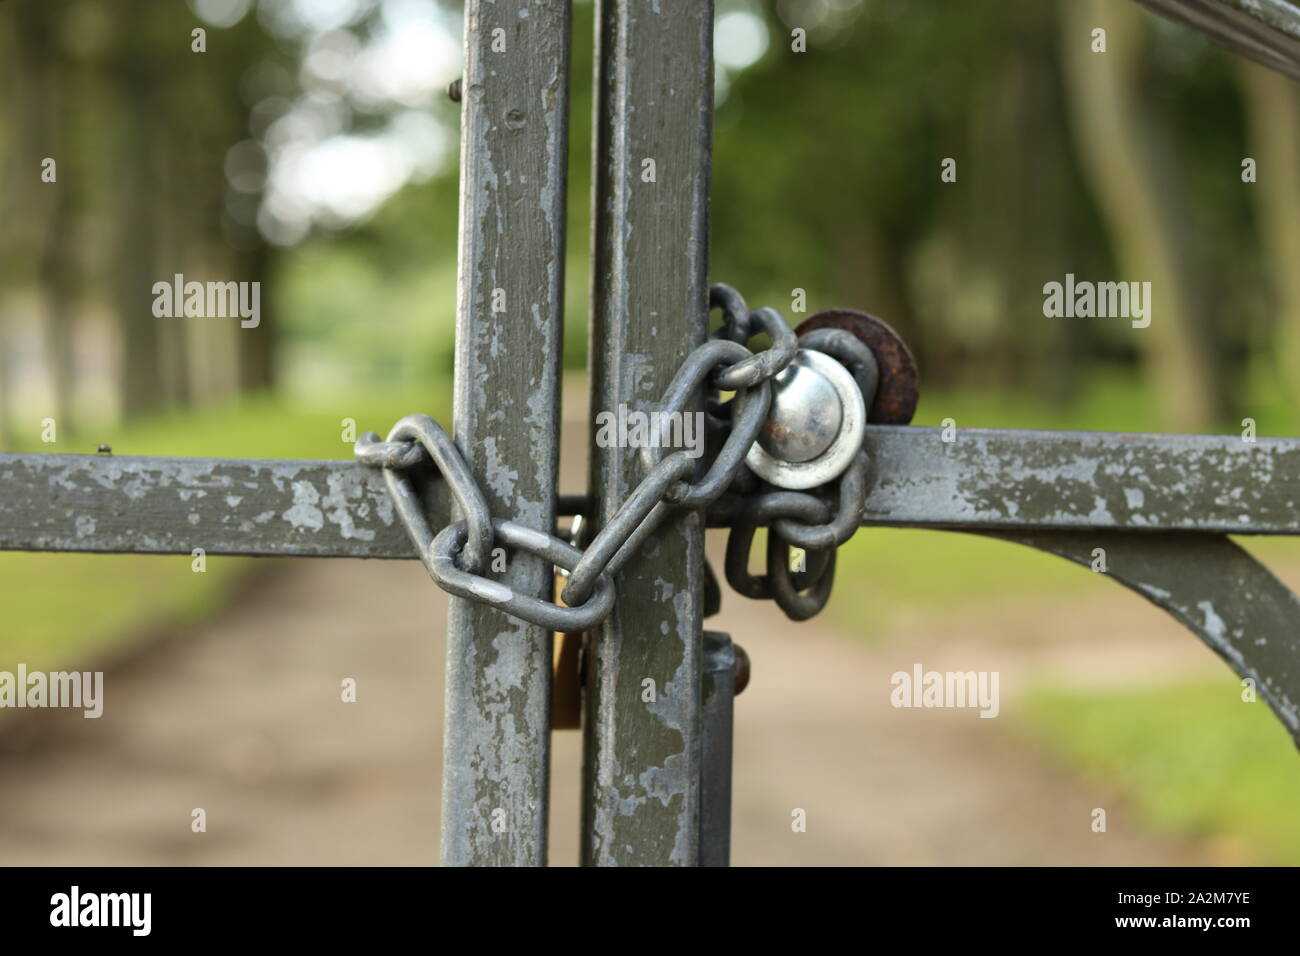 A metal gate chained closed. Stock Photo